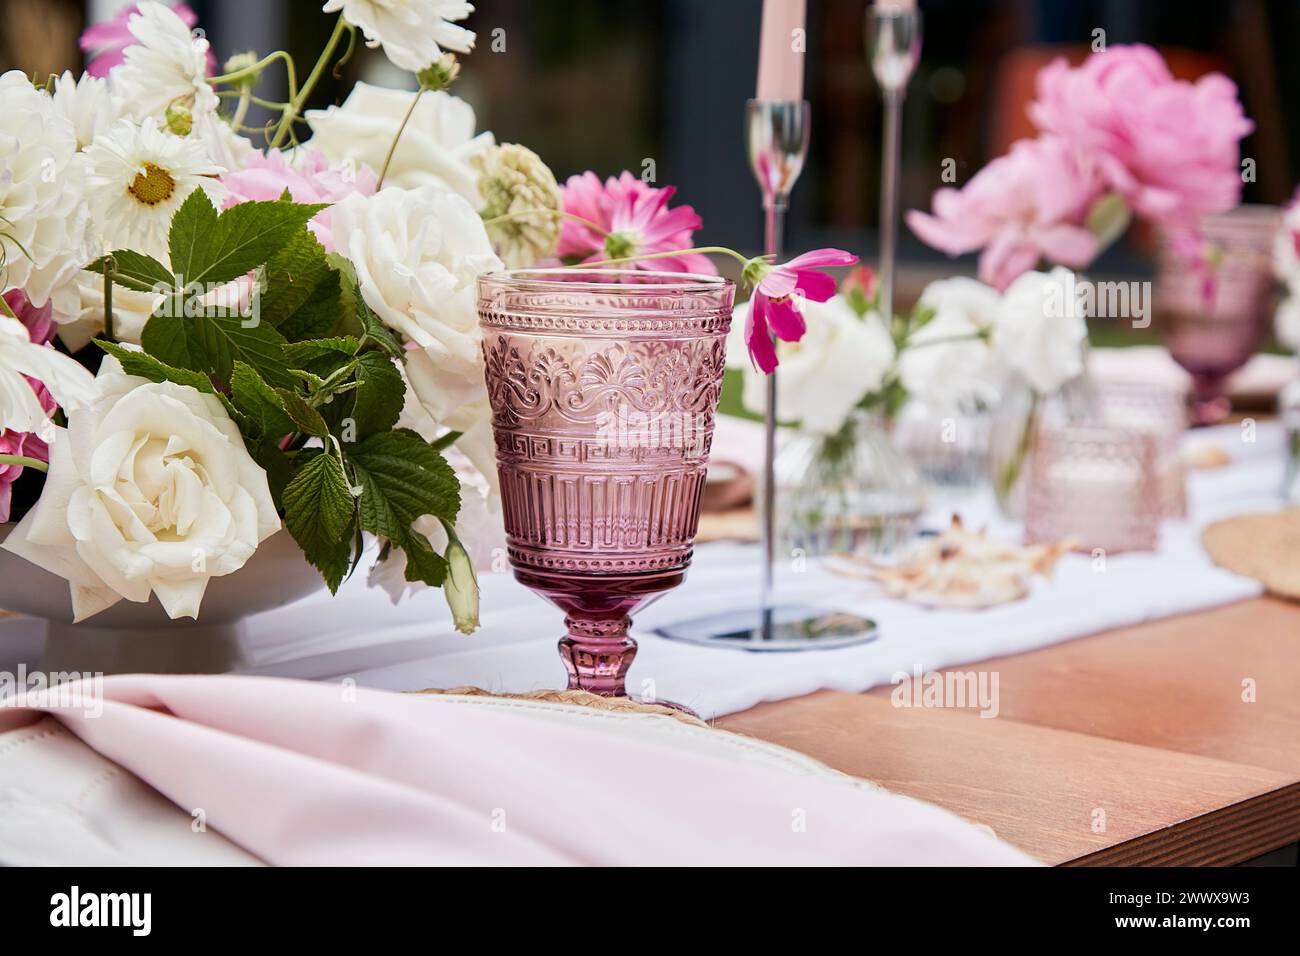 Outside aesthetic festive table setting among pink flowers arrangement, candles and shells decor. Stock Photo